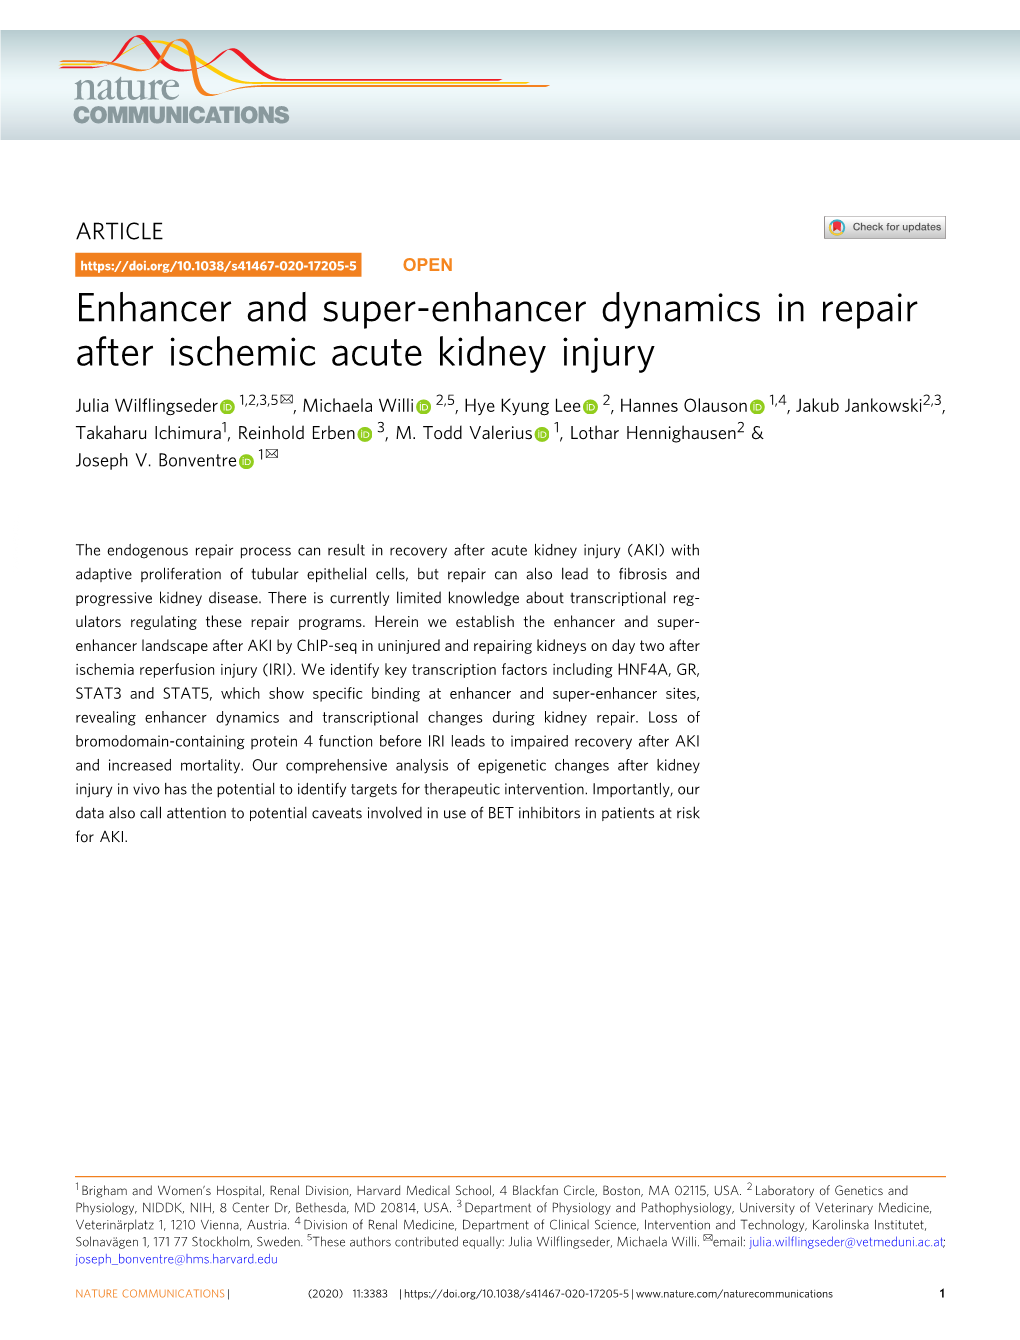 Enhancer and Super-Enhancer Dynamics in Repair After Ischemic Acute Kidney Injury